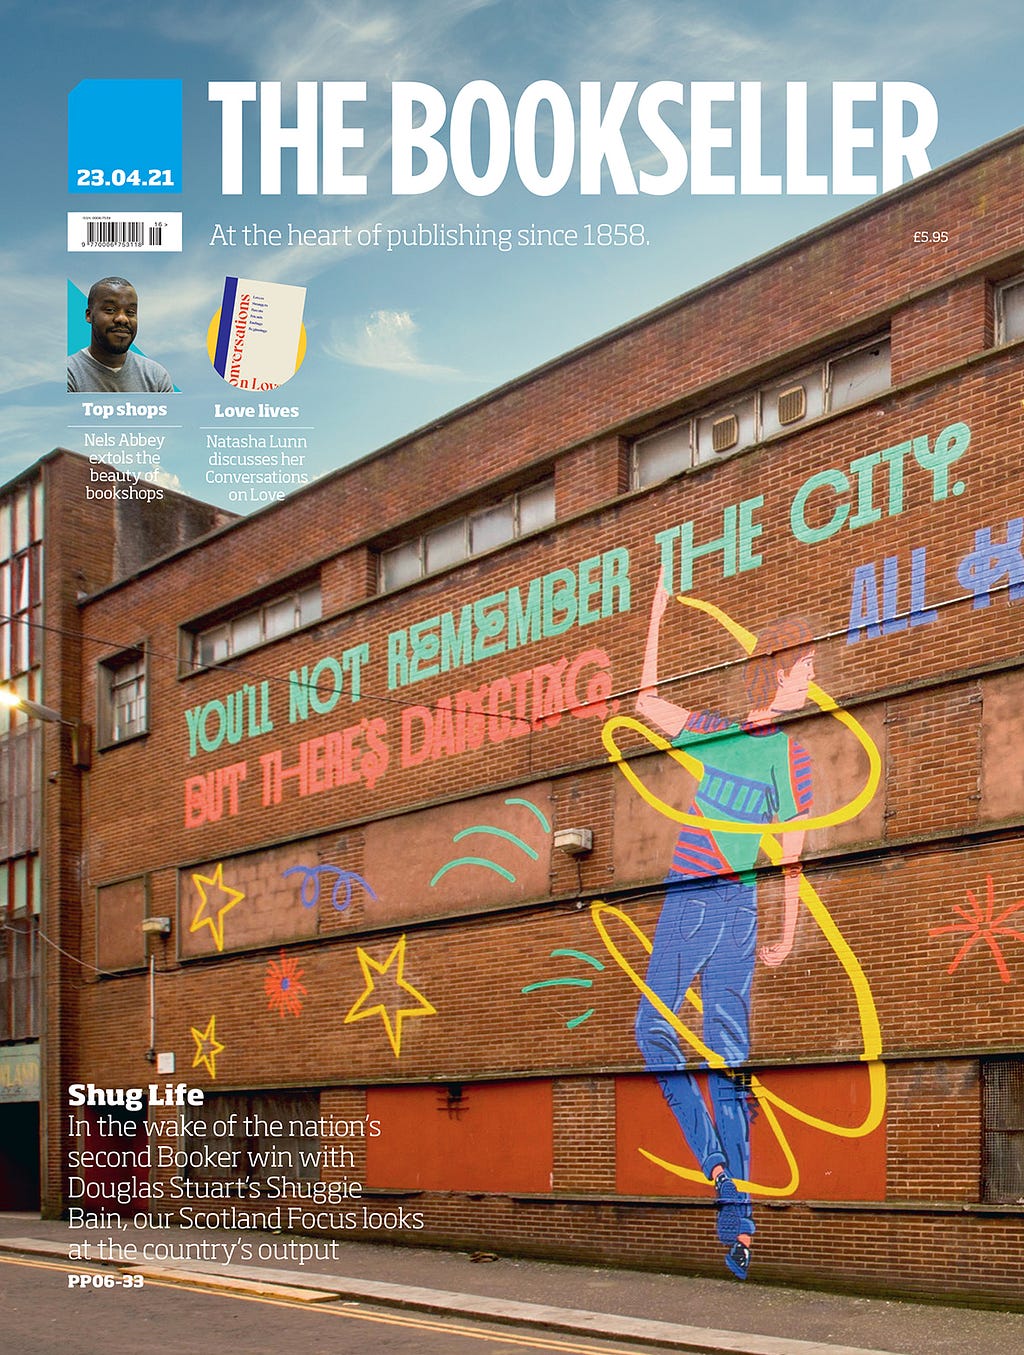 Front cover of The Bookseller #ScotlandFocus issue, featuring colour photo of the Shuggie Bain mural